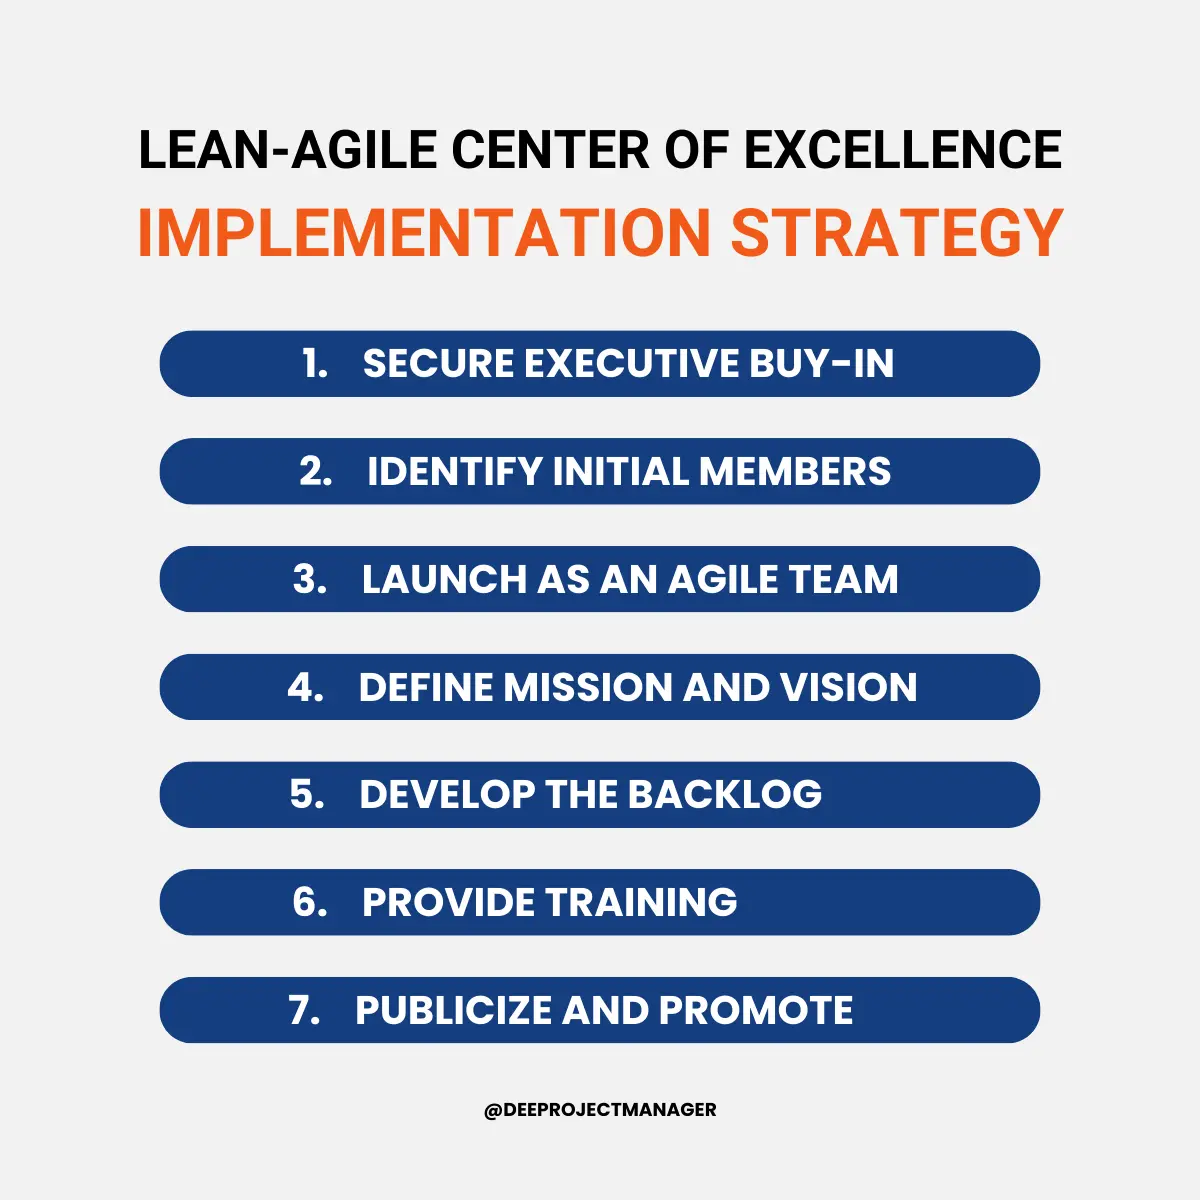 Lean-Agile Center of Excellence Implementation Strategy